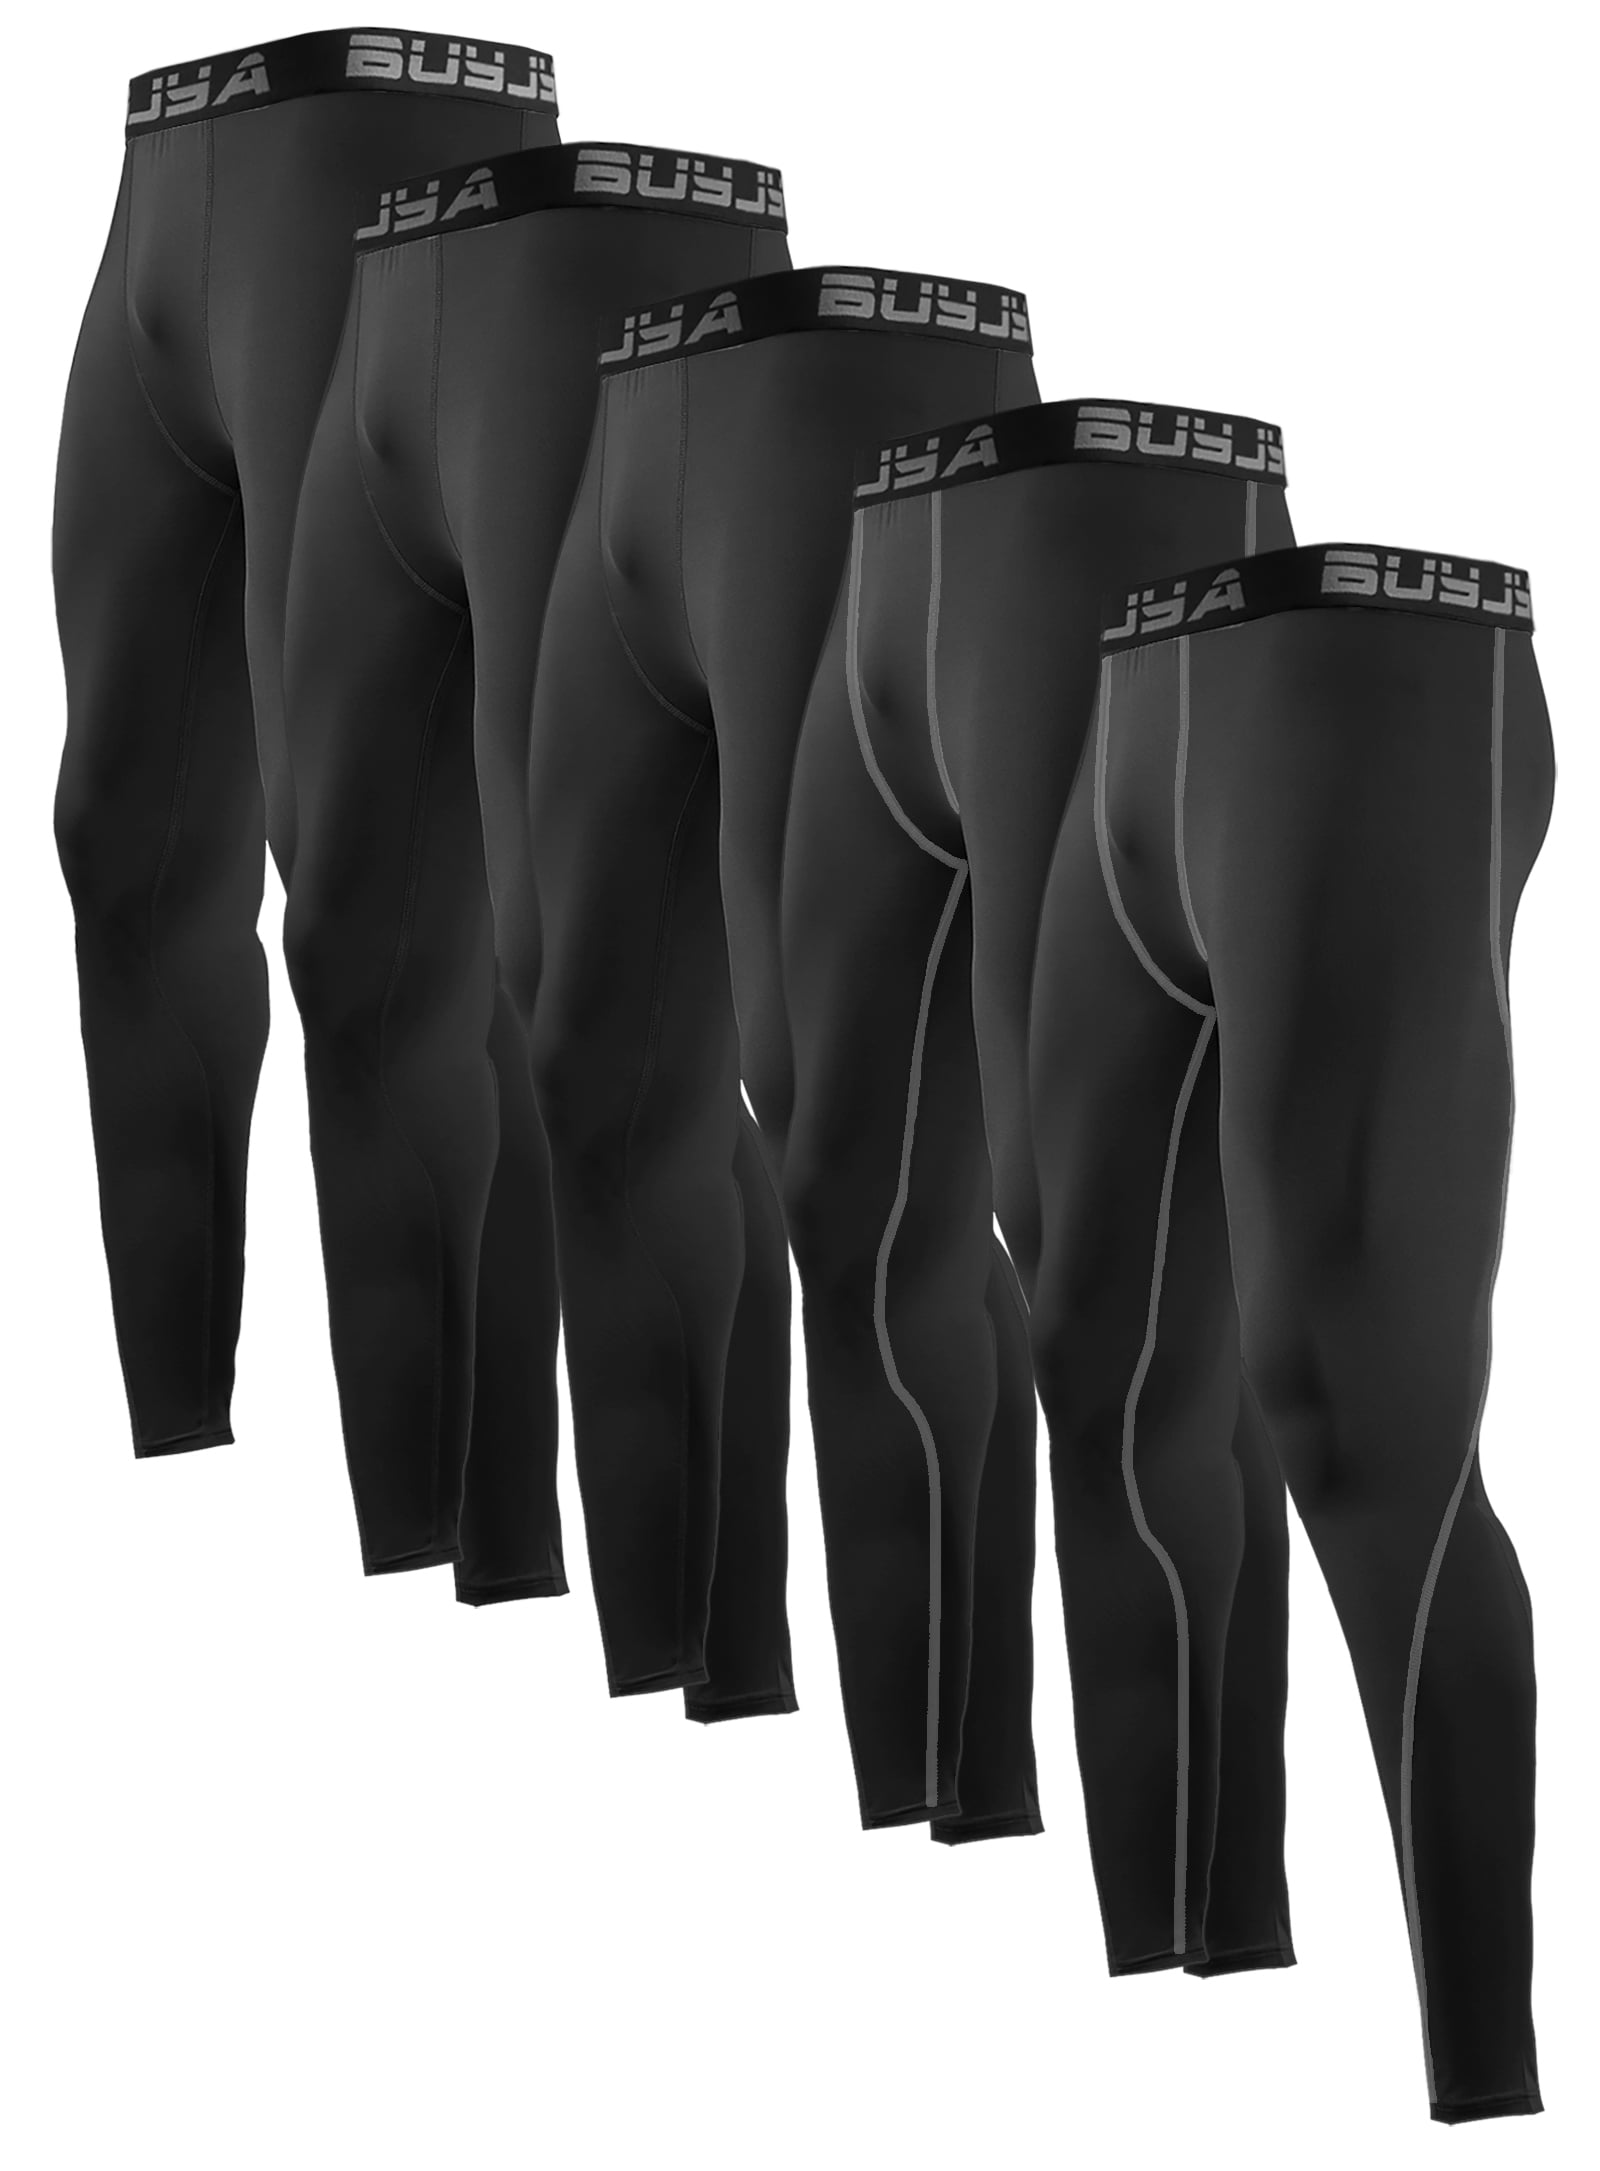 Men's Compression Leggings Pants Trousers Running Fitness